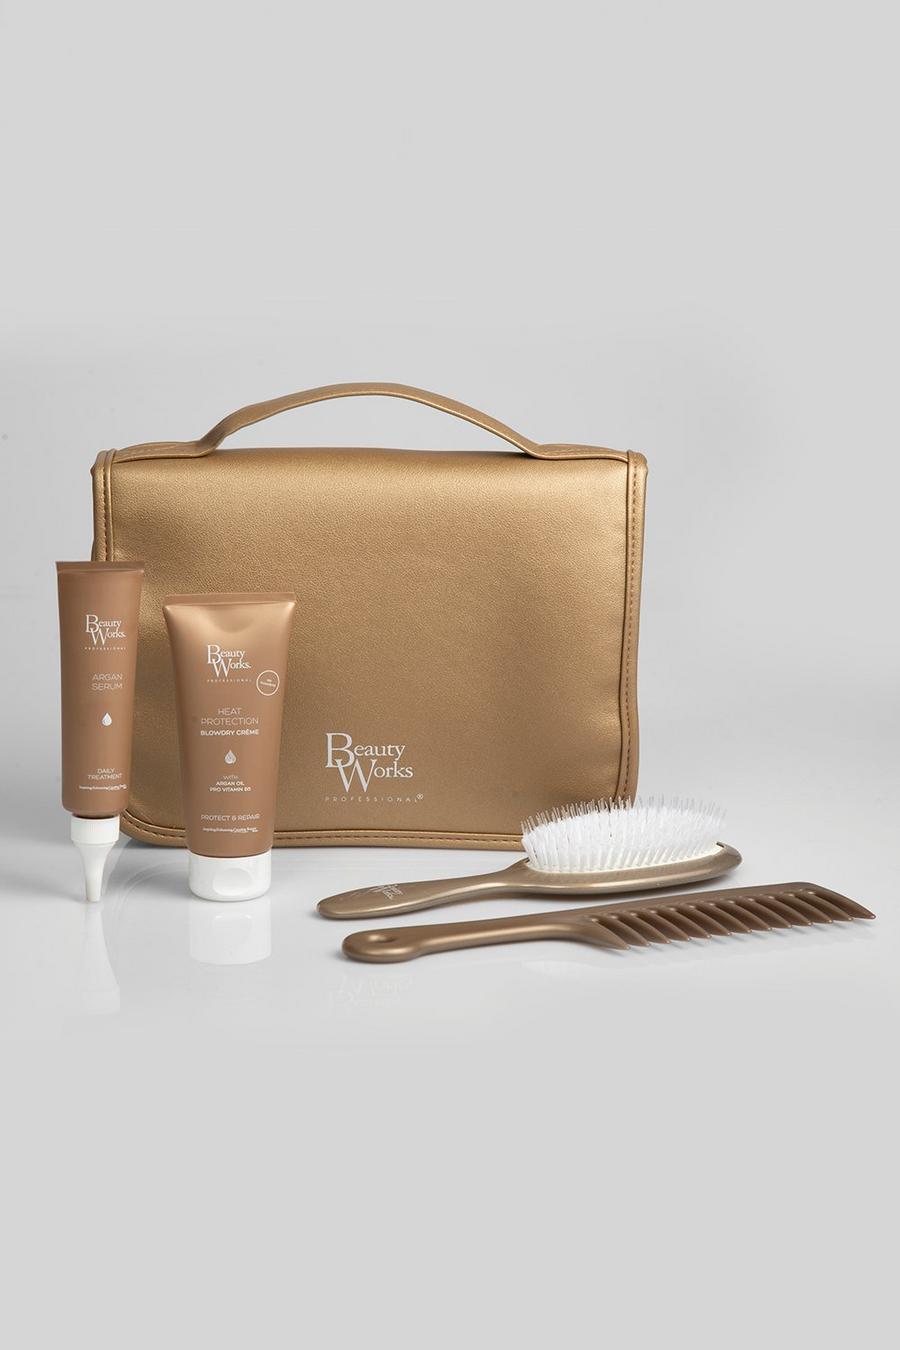 Gold metallic Beauty Works Mane Attraction Styling Kit